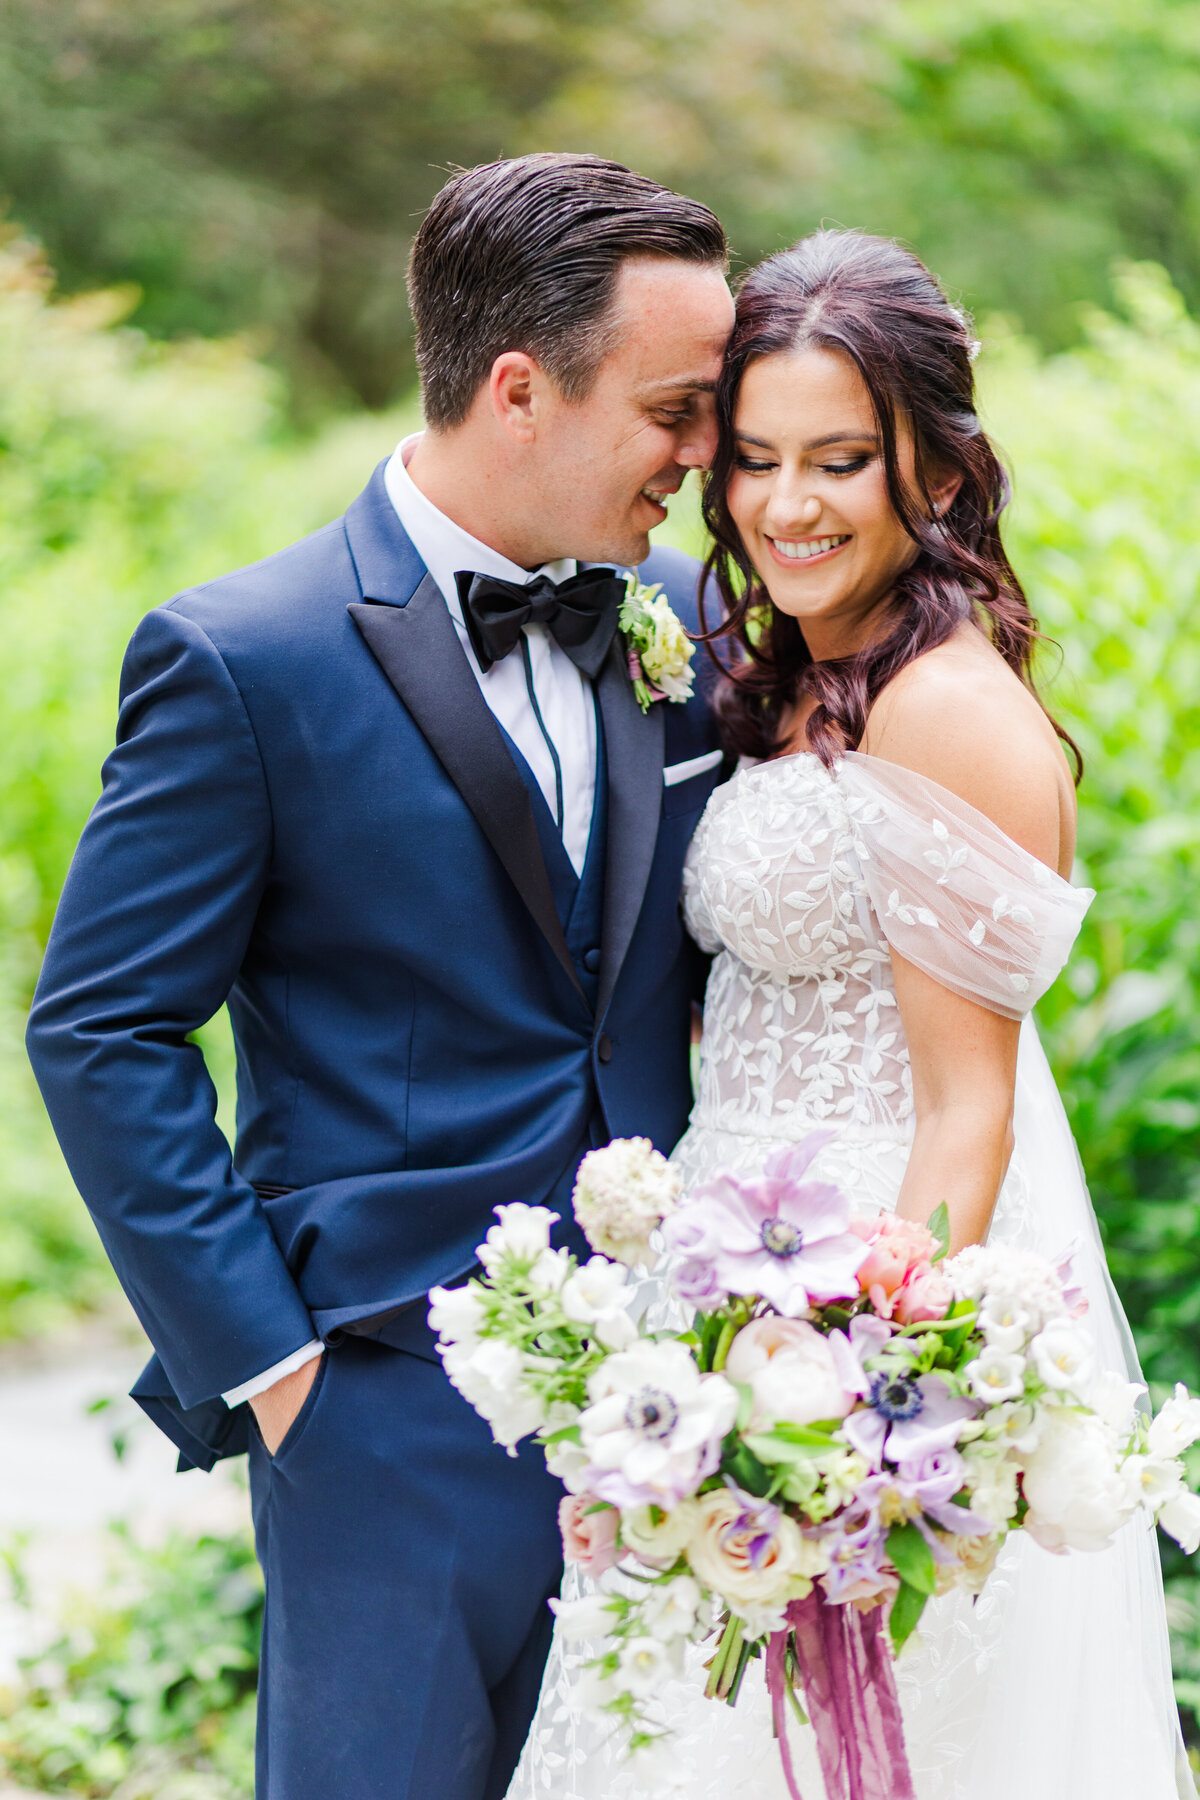 stunning bride and groom with gorgeous purple floral bouquet